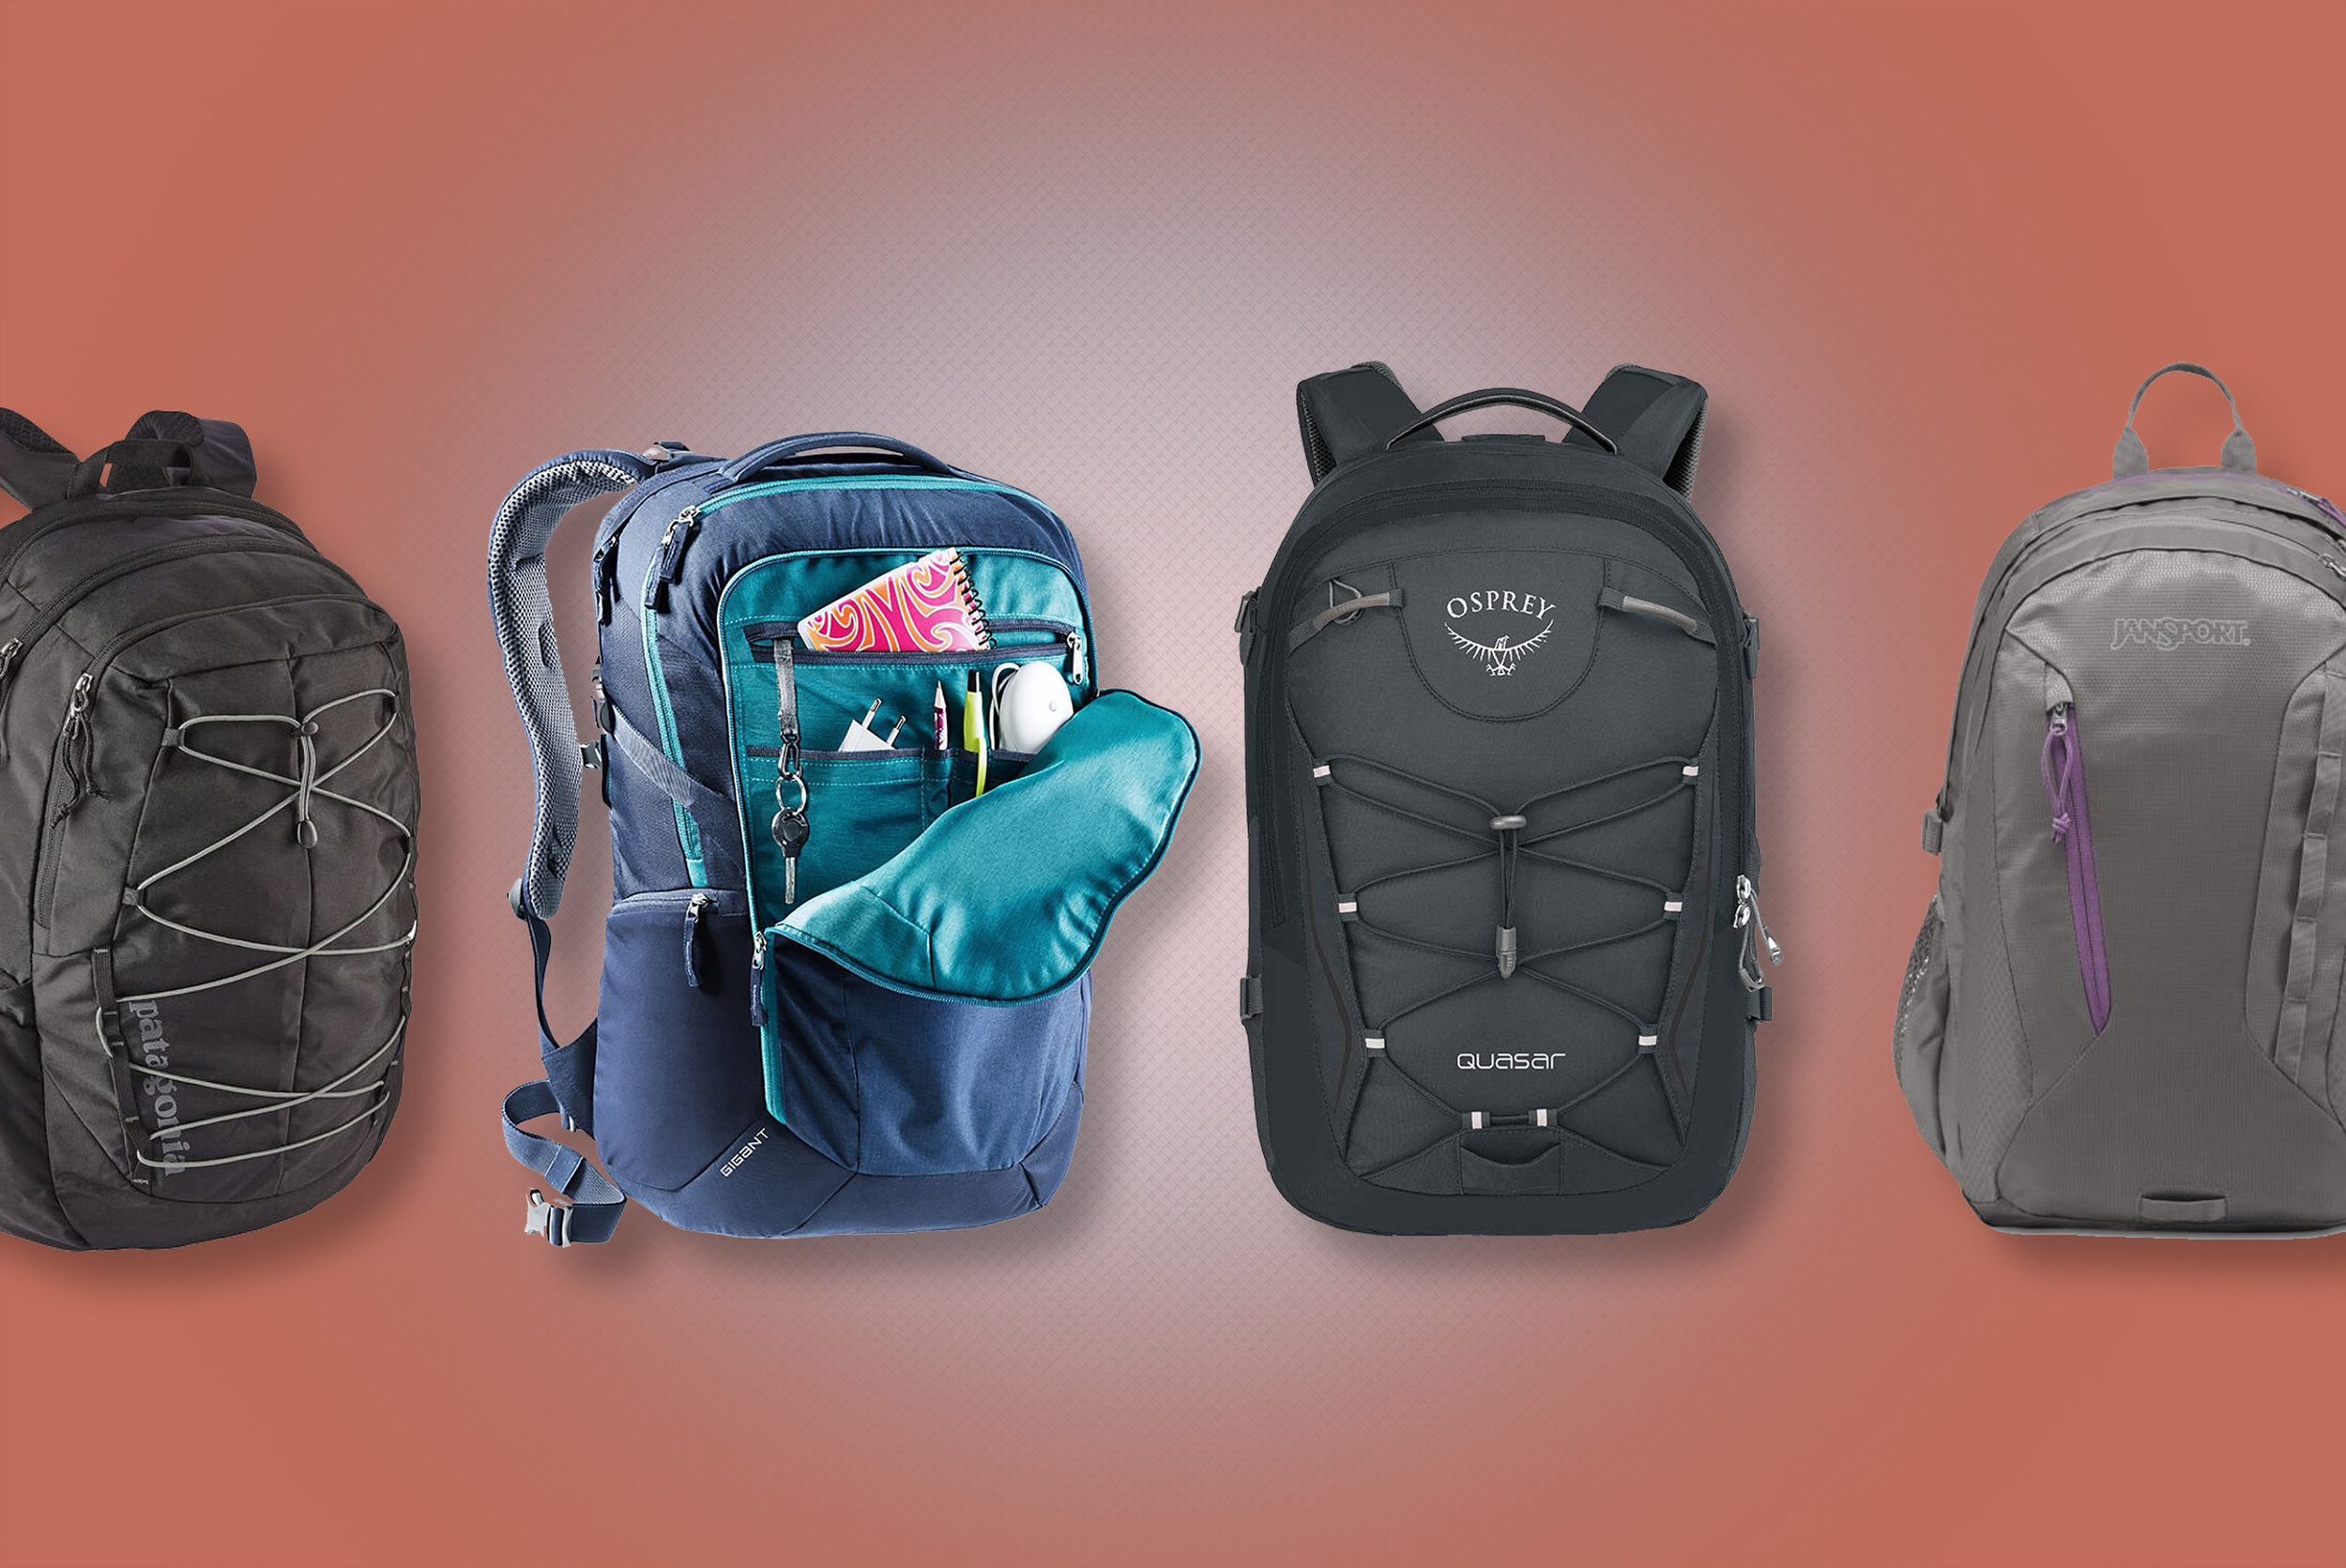 where to get north face backpacks